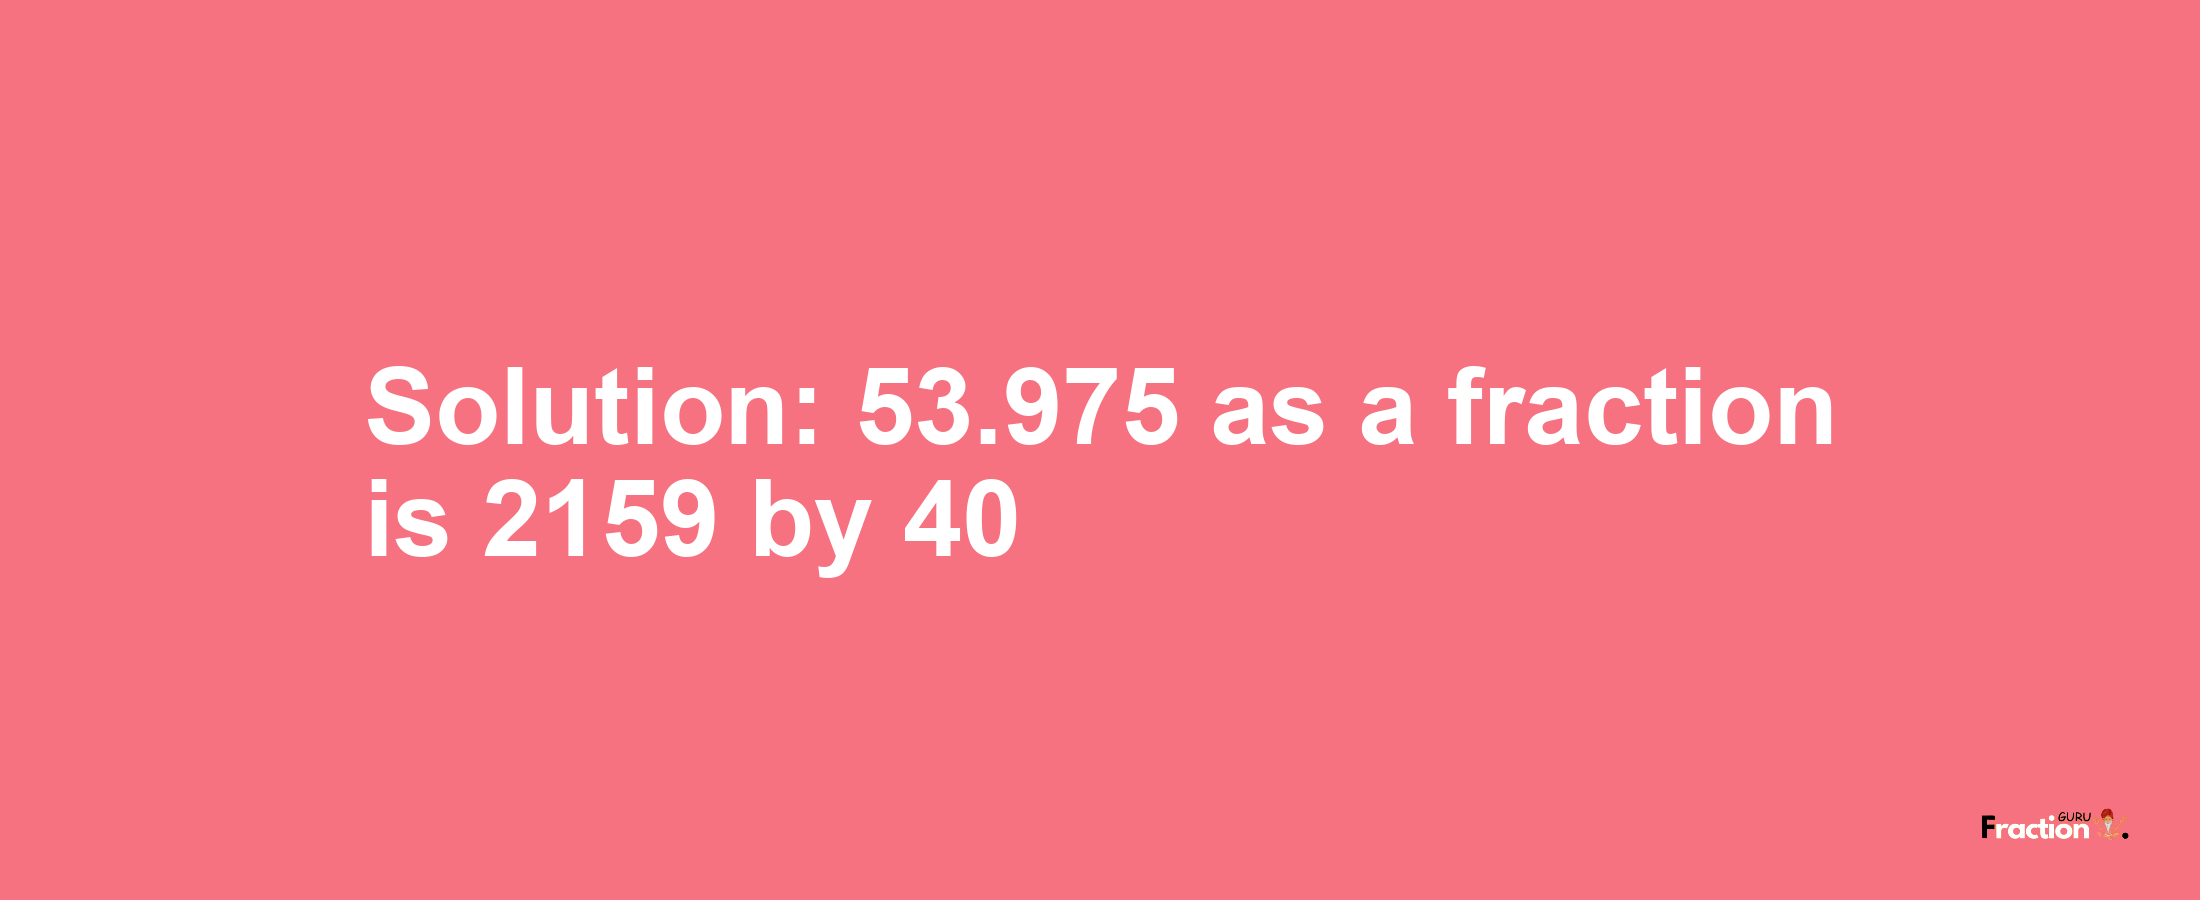 Solution:53.975 as a fraction is 2159/40